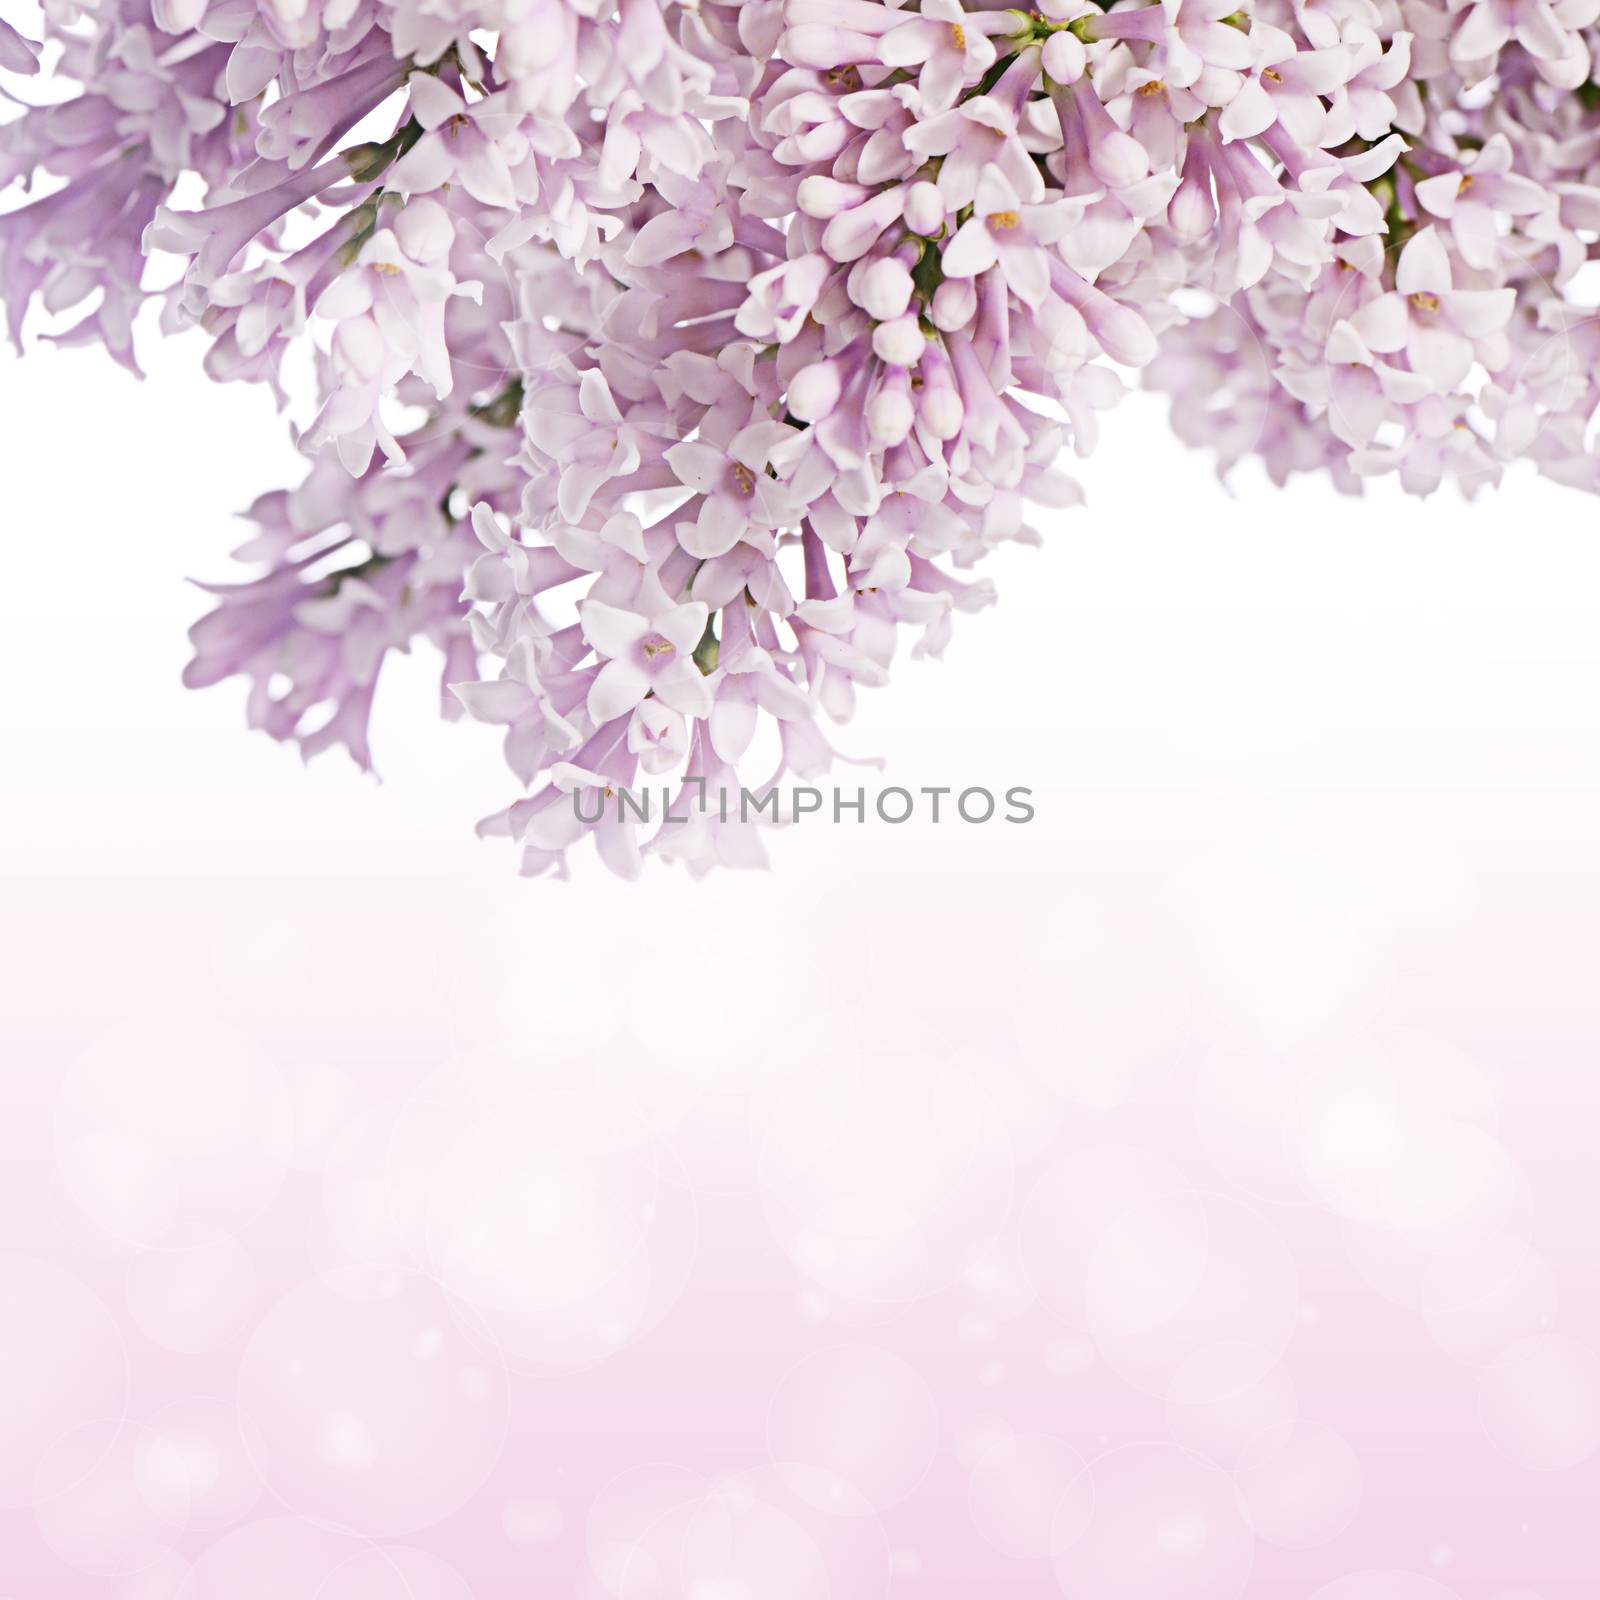 The flower pink lilac as a background